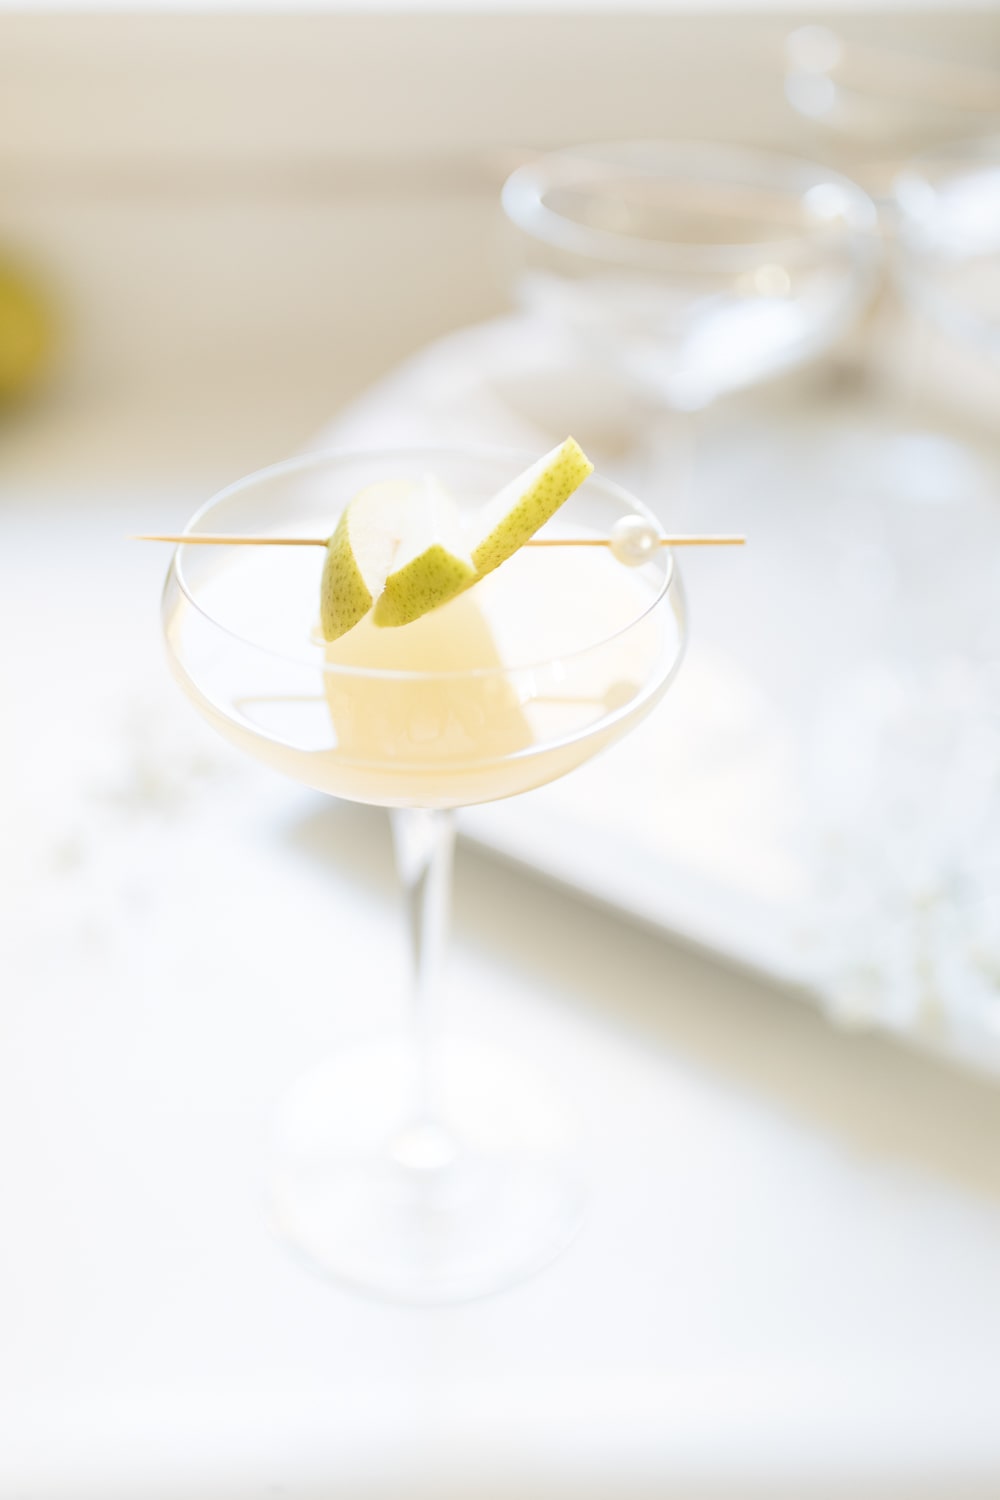 Easy new years cocktail recipe by blogger Stephanie Ziajka on Diary of a Debutante